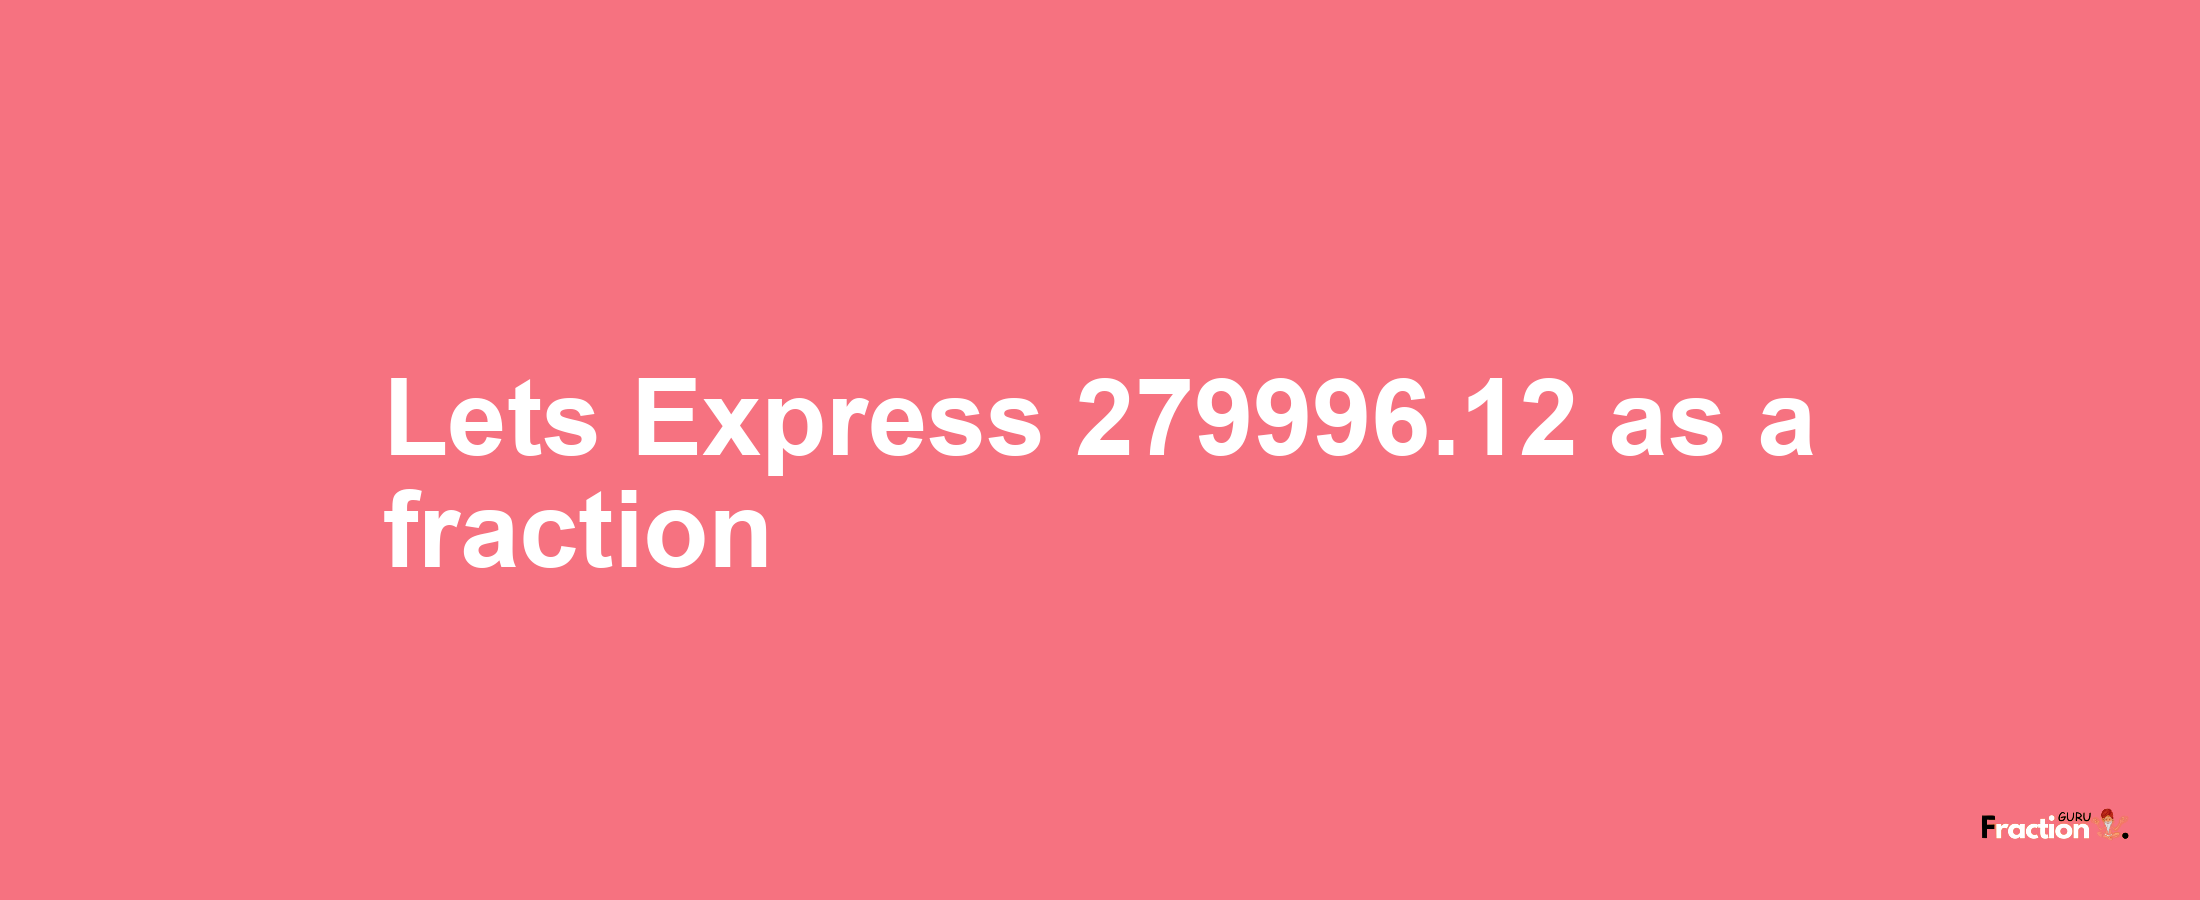 Lets Express 279996.12 as afraction